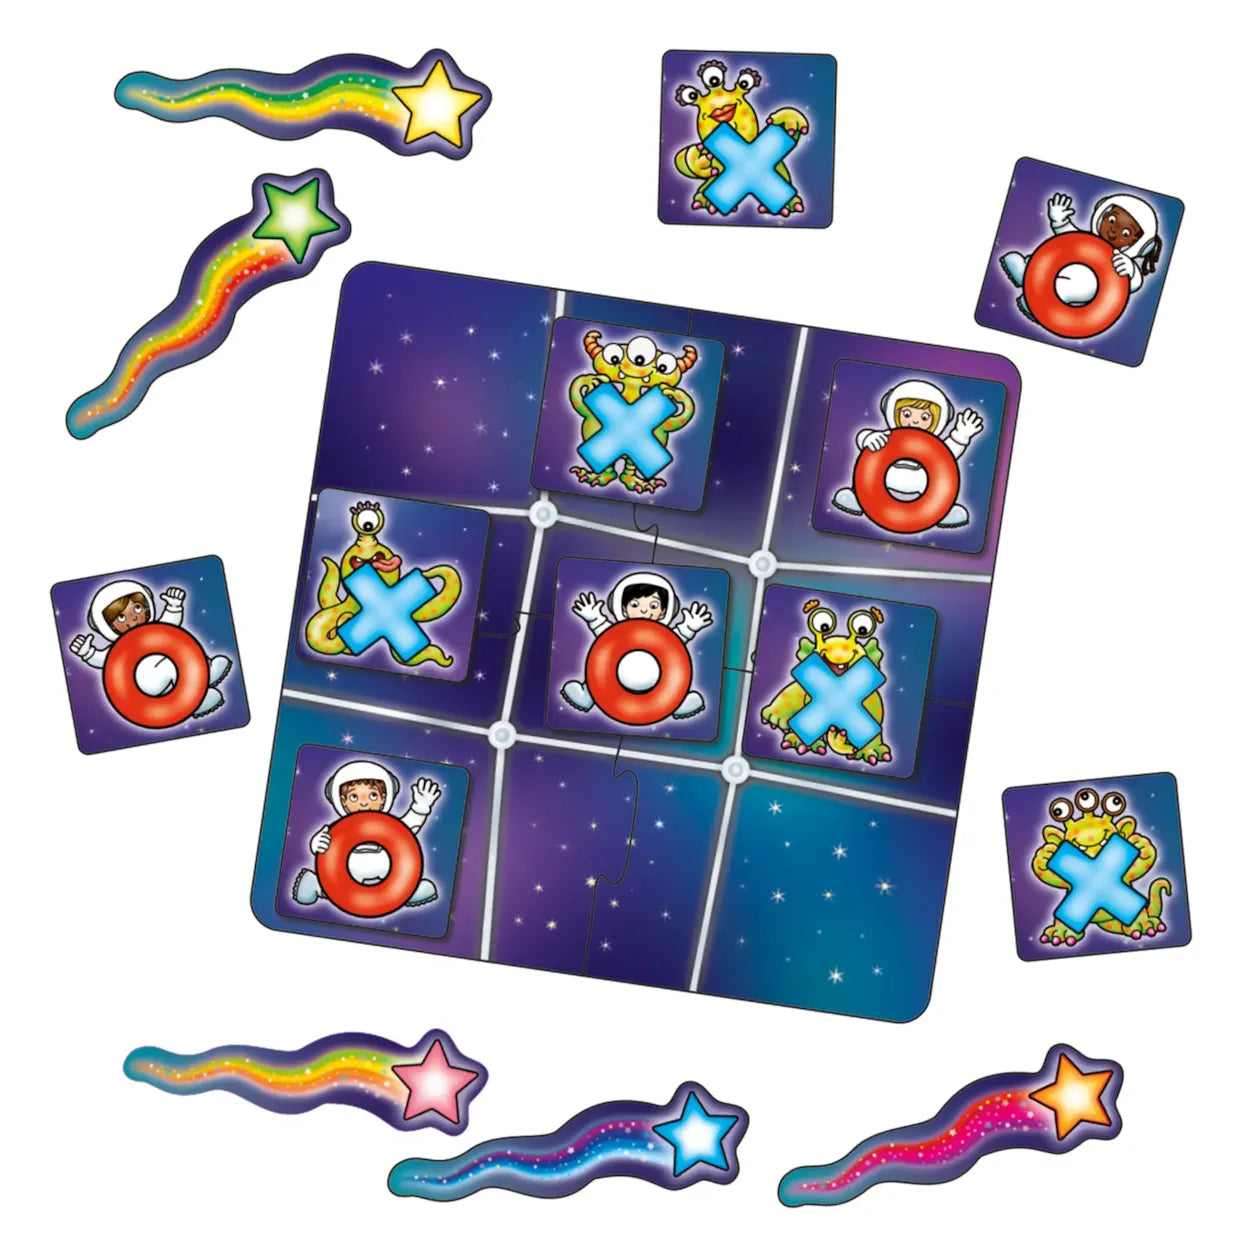 Orchard Toys Astronauts and Crosses - Mini Game